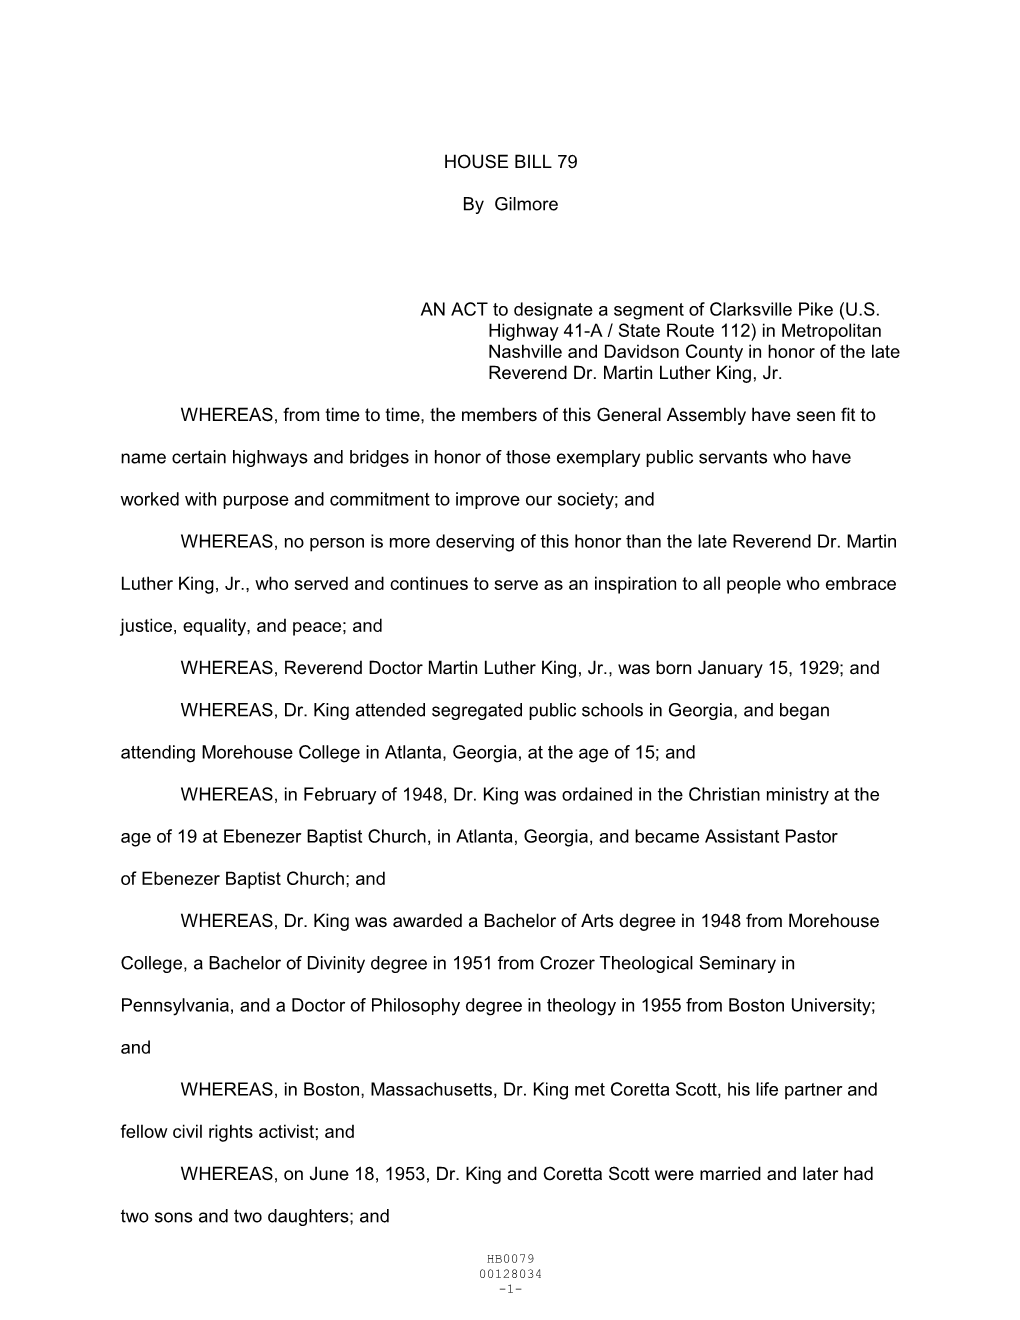 HOUSE BILL 79 by Gilmore an ACT to Designate a Segment Of